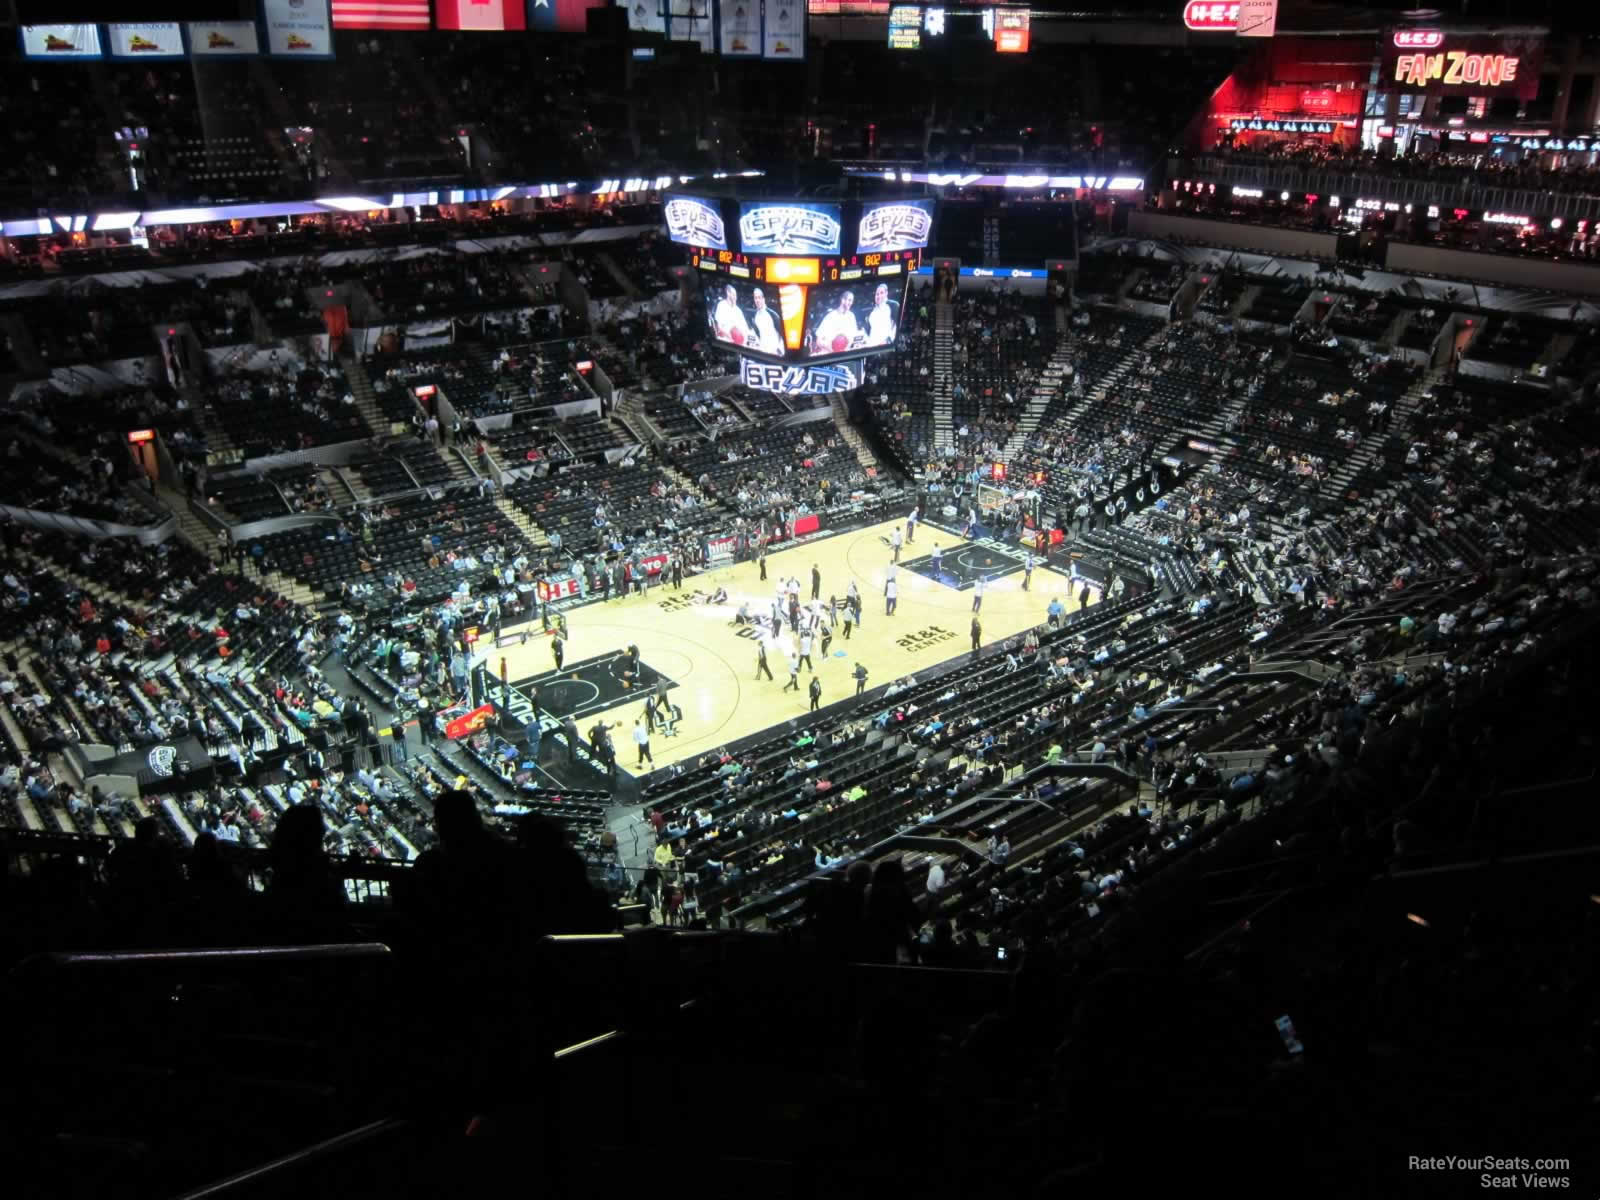 section 227, row 14 seat view  for basketball - at&t center